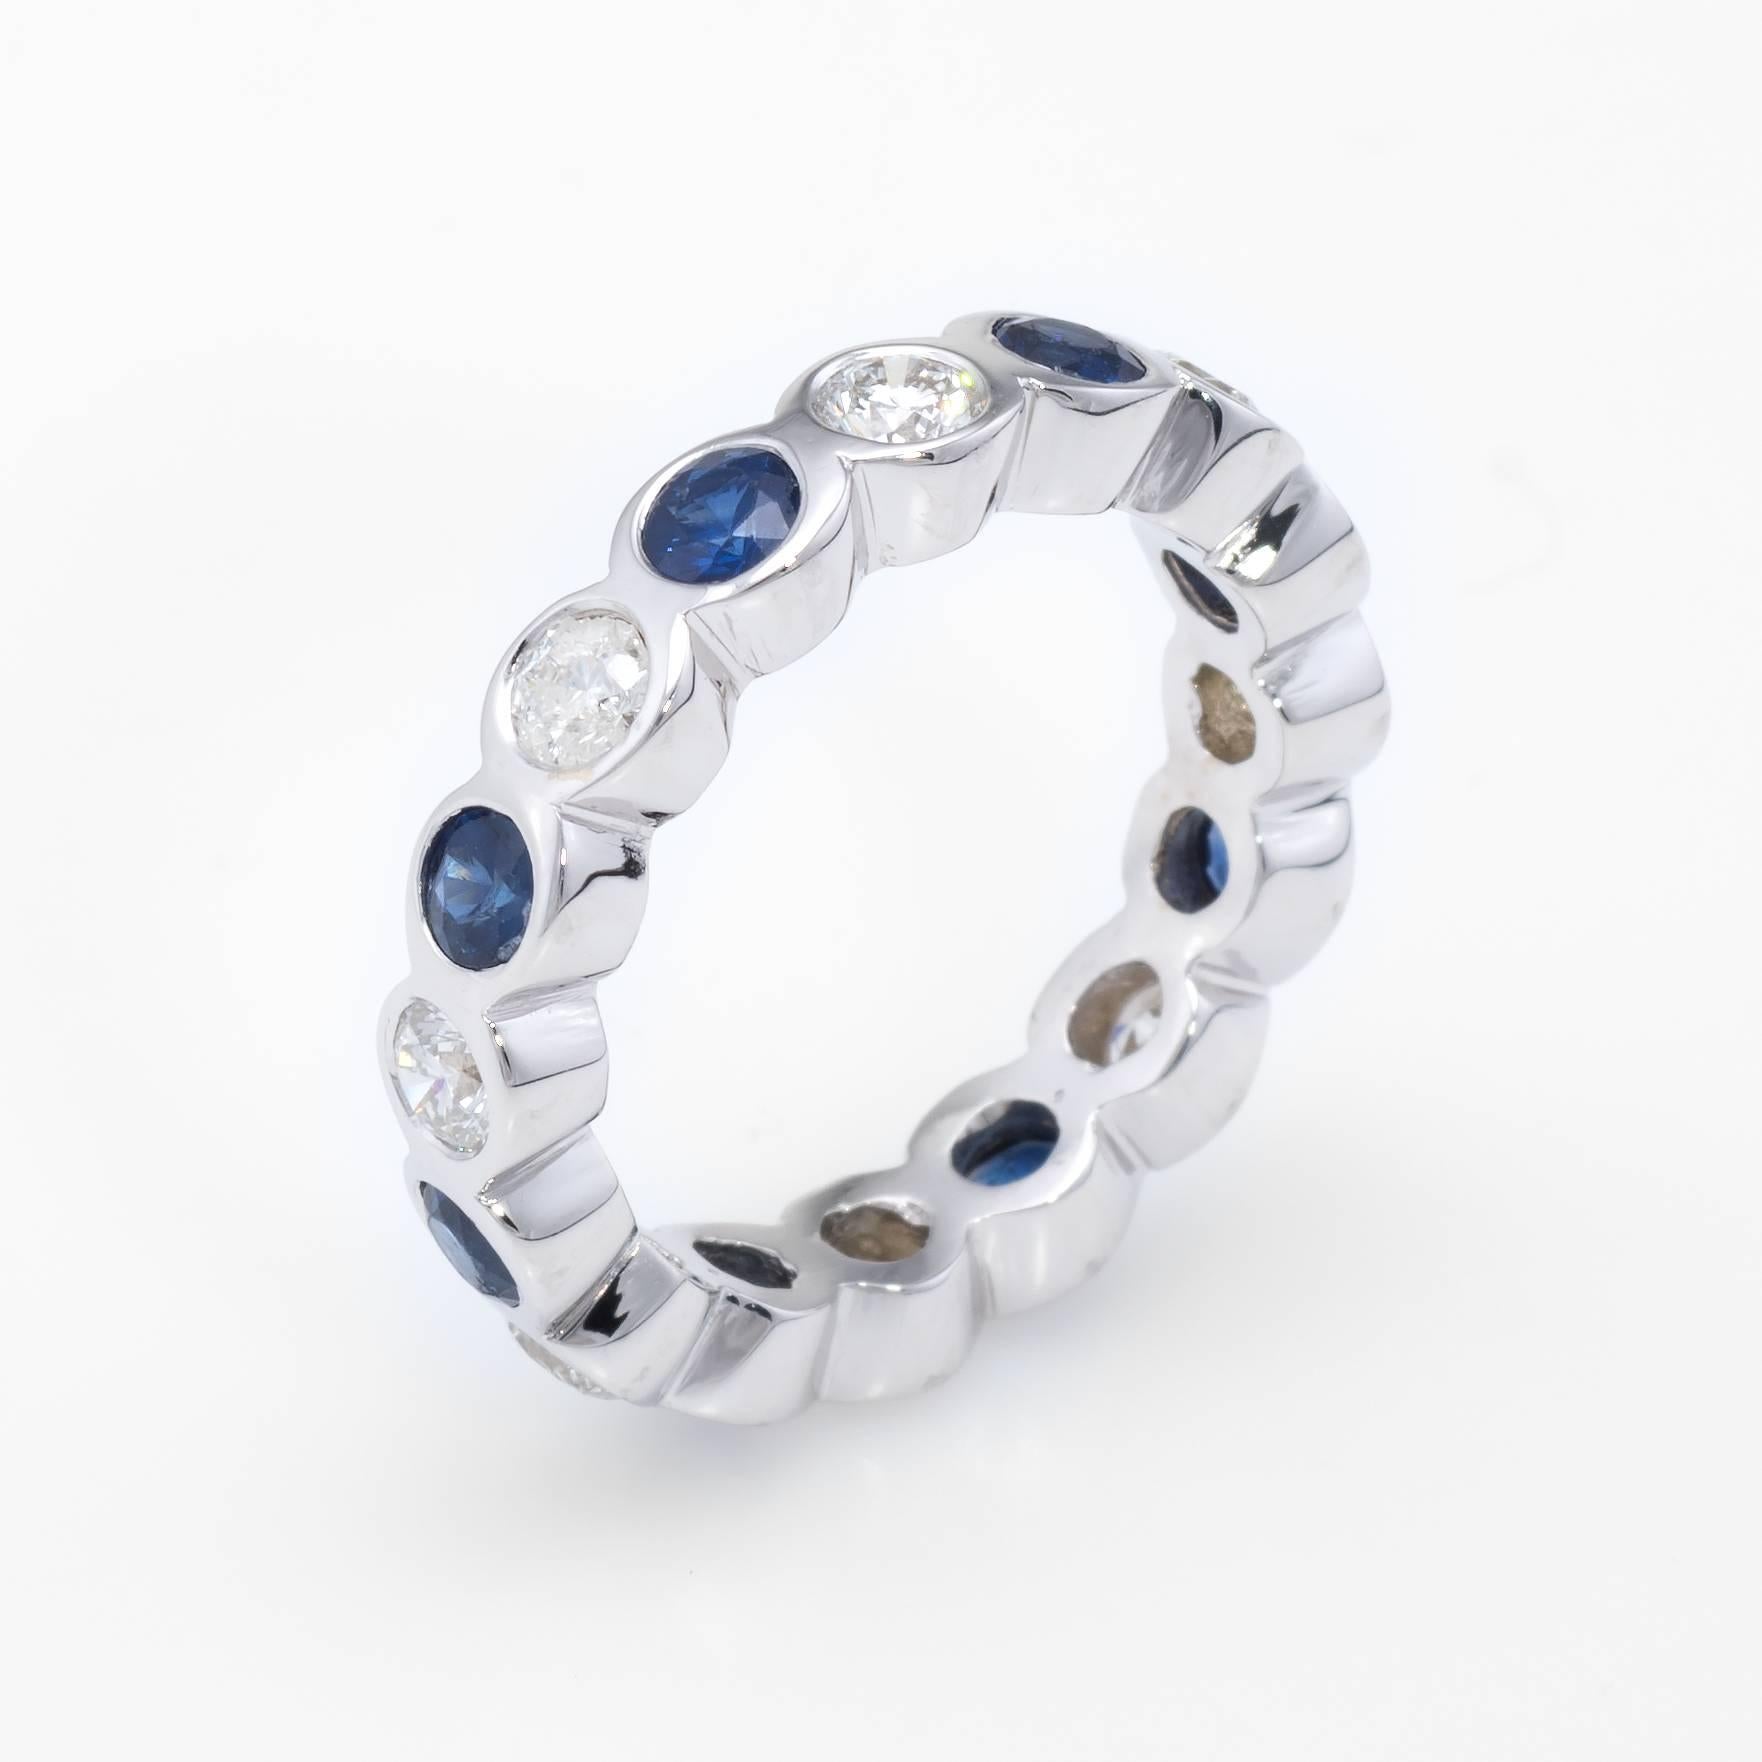 Elegant estate eternity ring, crafted in 18 karat white gold. 

Sapphires measure 3mm each and total an estimated 1.20 carats, accented with an estimated 0.88 carats of round brilliant cut diamonds (estimated at I-J color and SI1-2 clarity).   

The